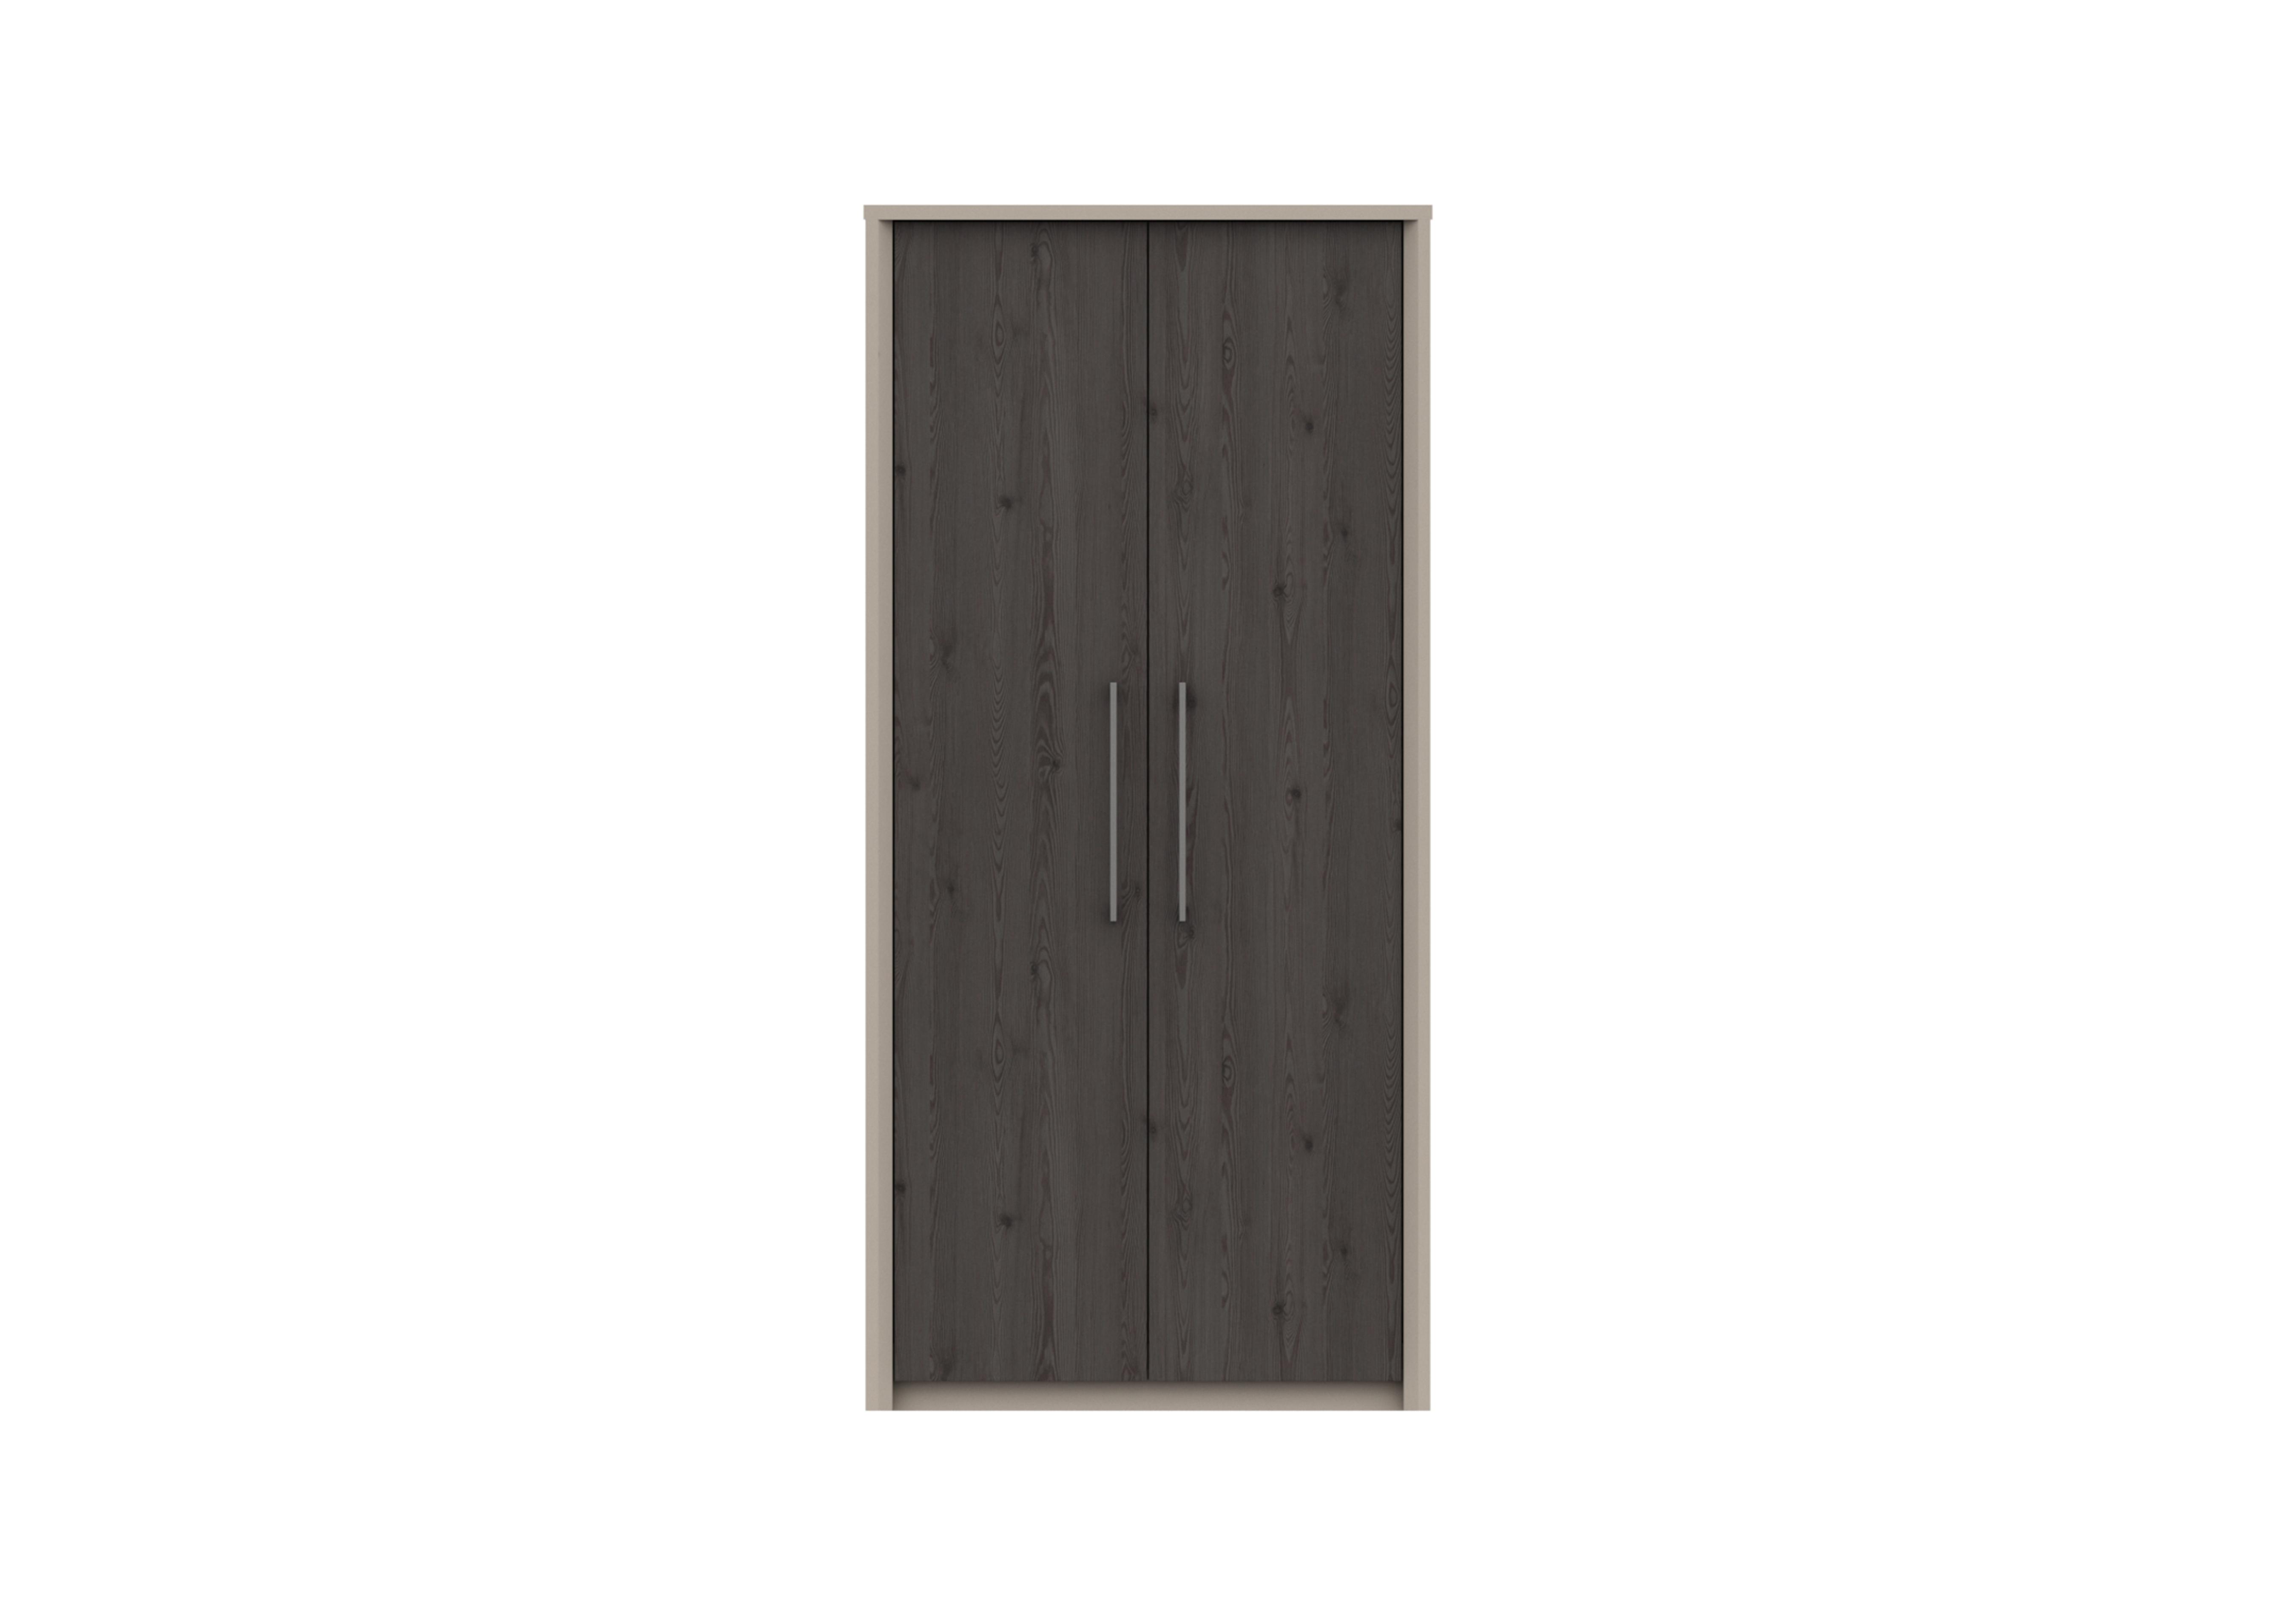 Paddington 2 Door Wardrobe in Fired Earth/Anthracite Larch on Furniture Village